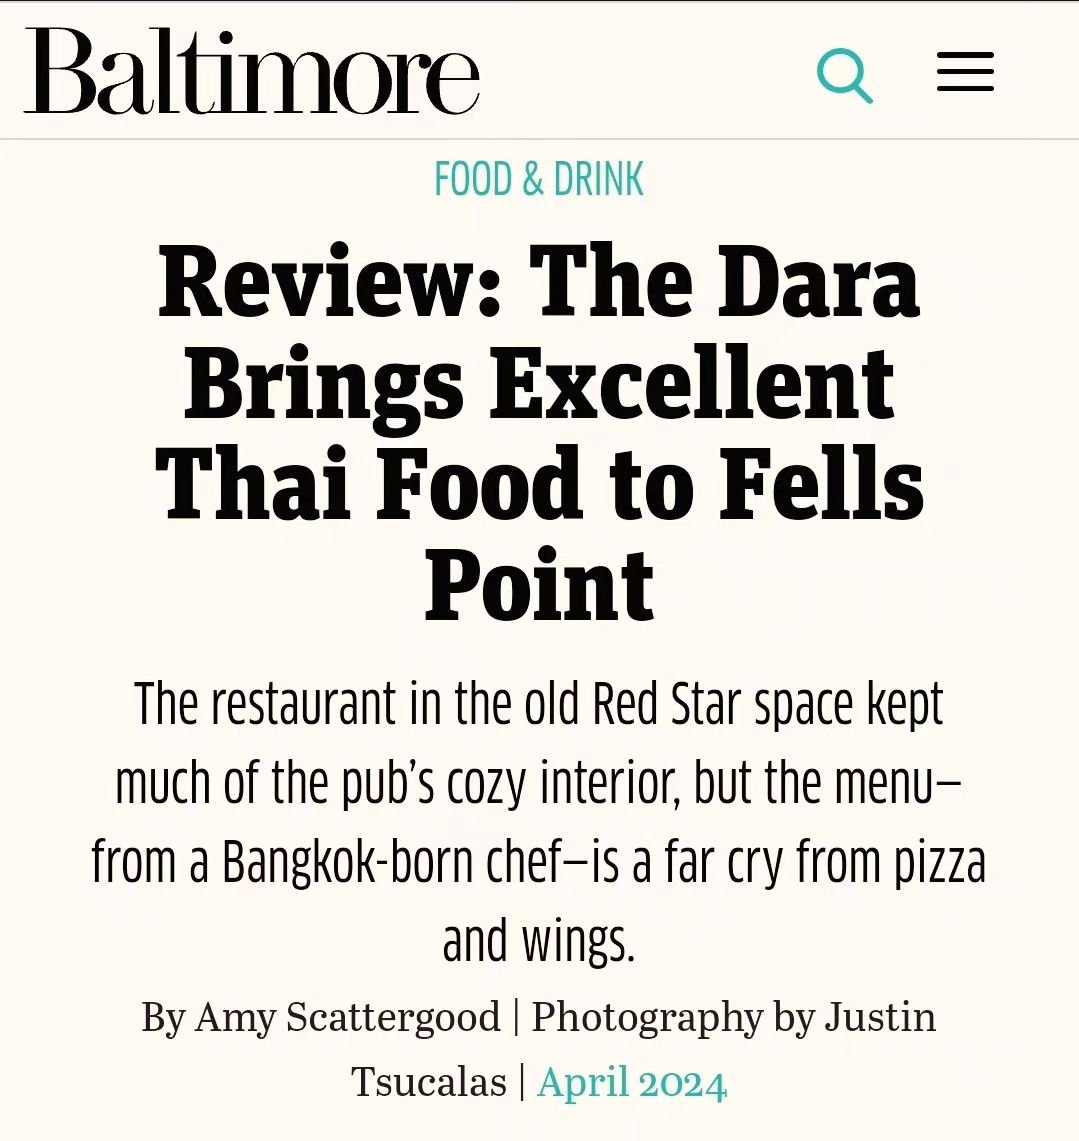 It is truly a happy day here at The Dara! We are so incredibly proud to share with you...

Our feature in this month's issue of @baltmag! A huge shout out to @ascattergood for writing this wonderful piece 📃 and @plaidphoto for the amazing photograph